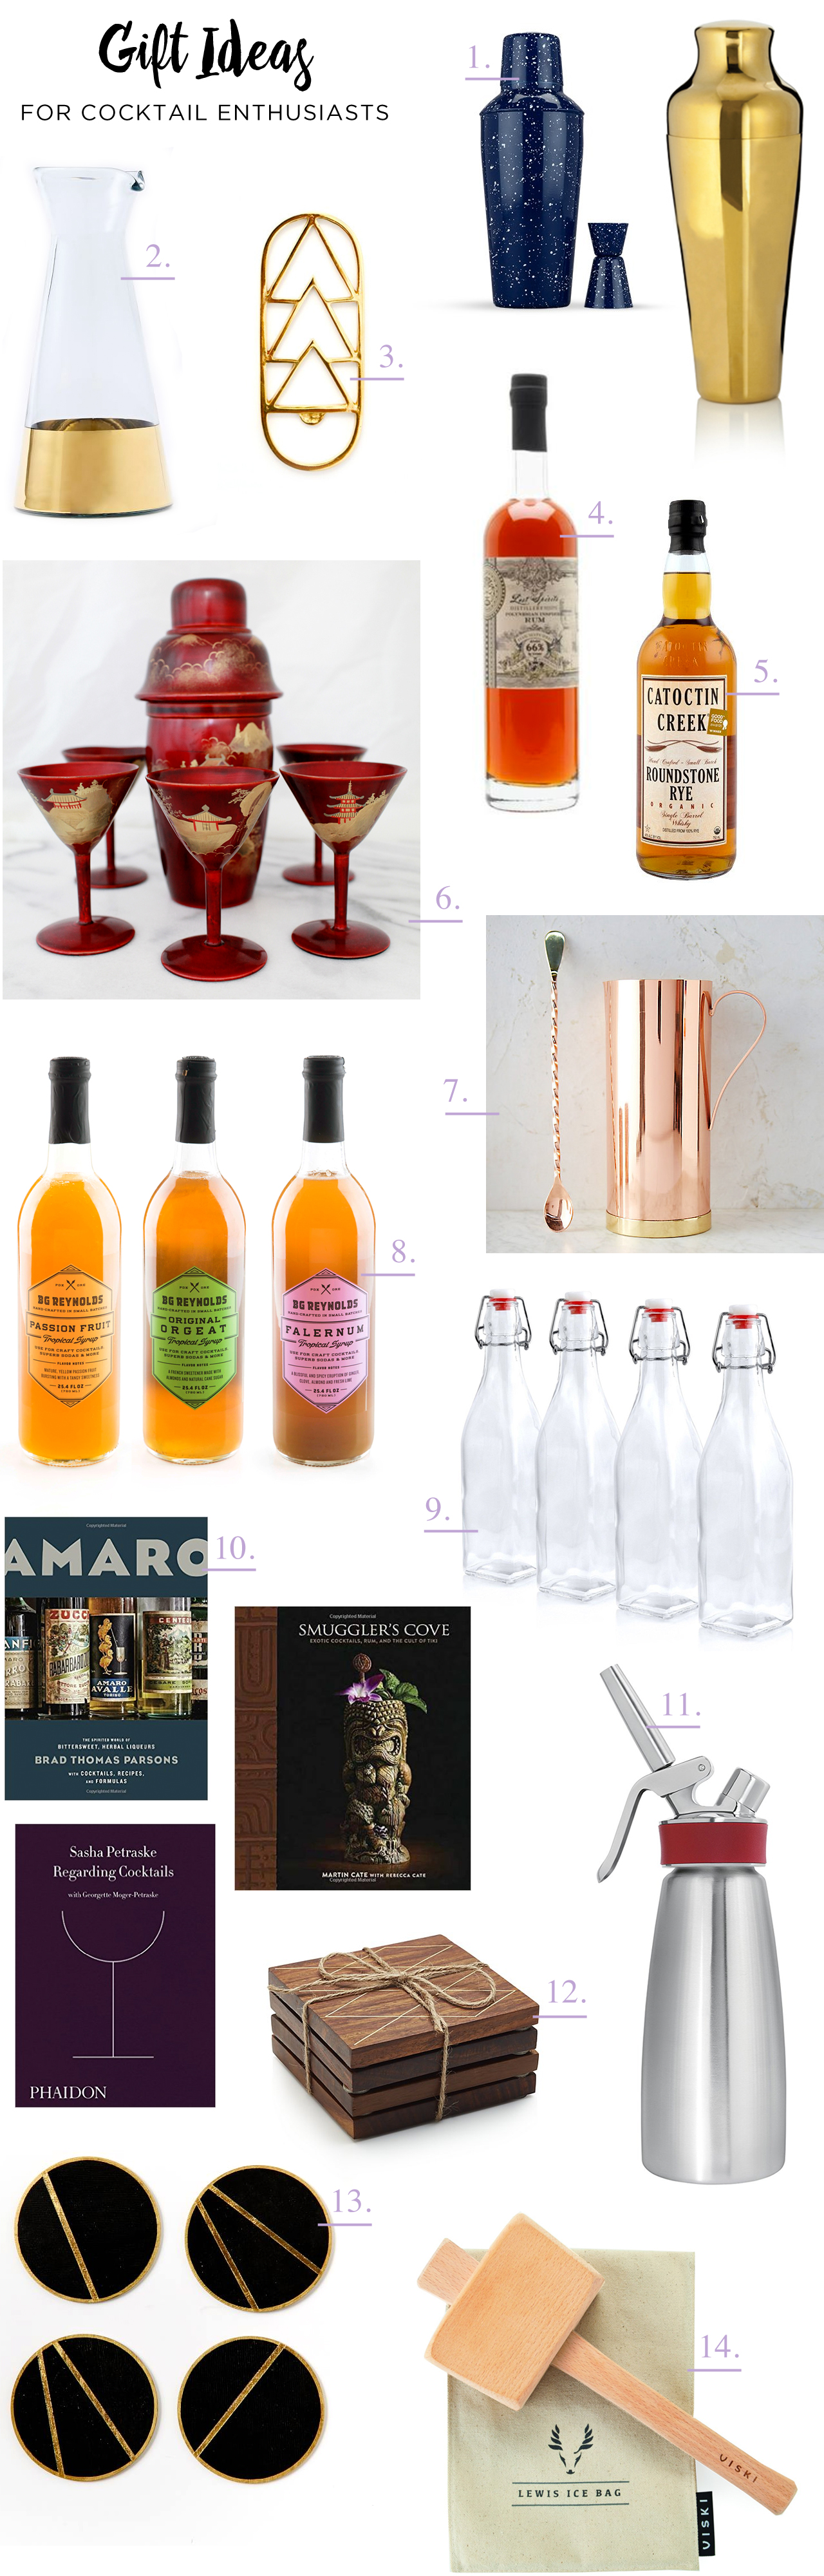 2016 Gift Guide: Gift Ideas for the Cocktail Enthusiast